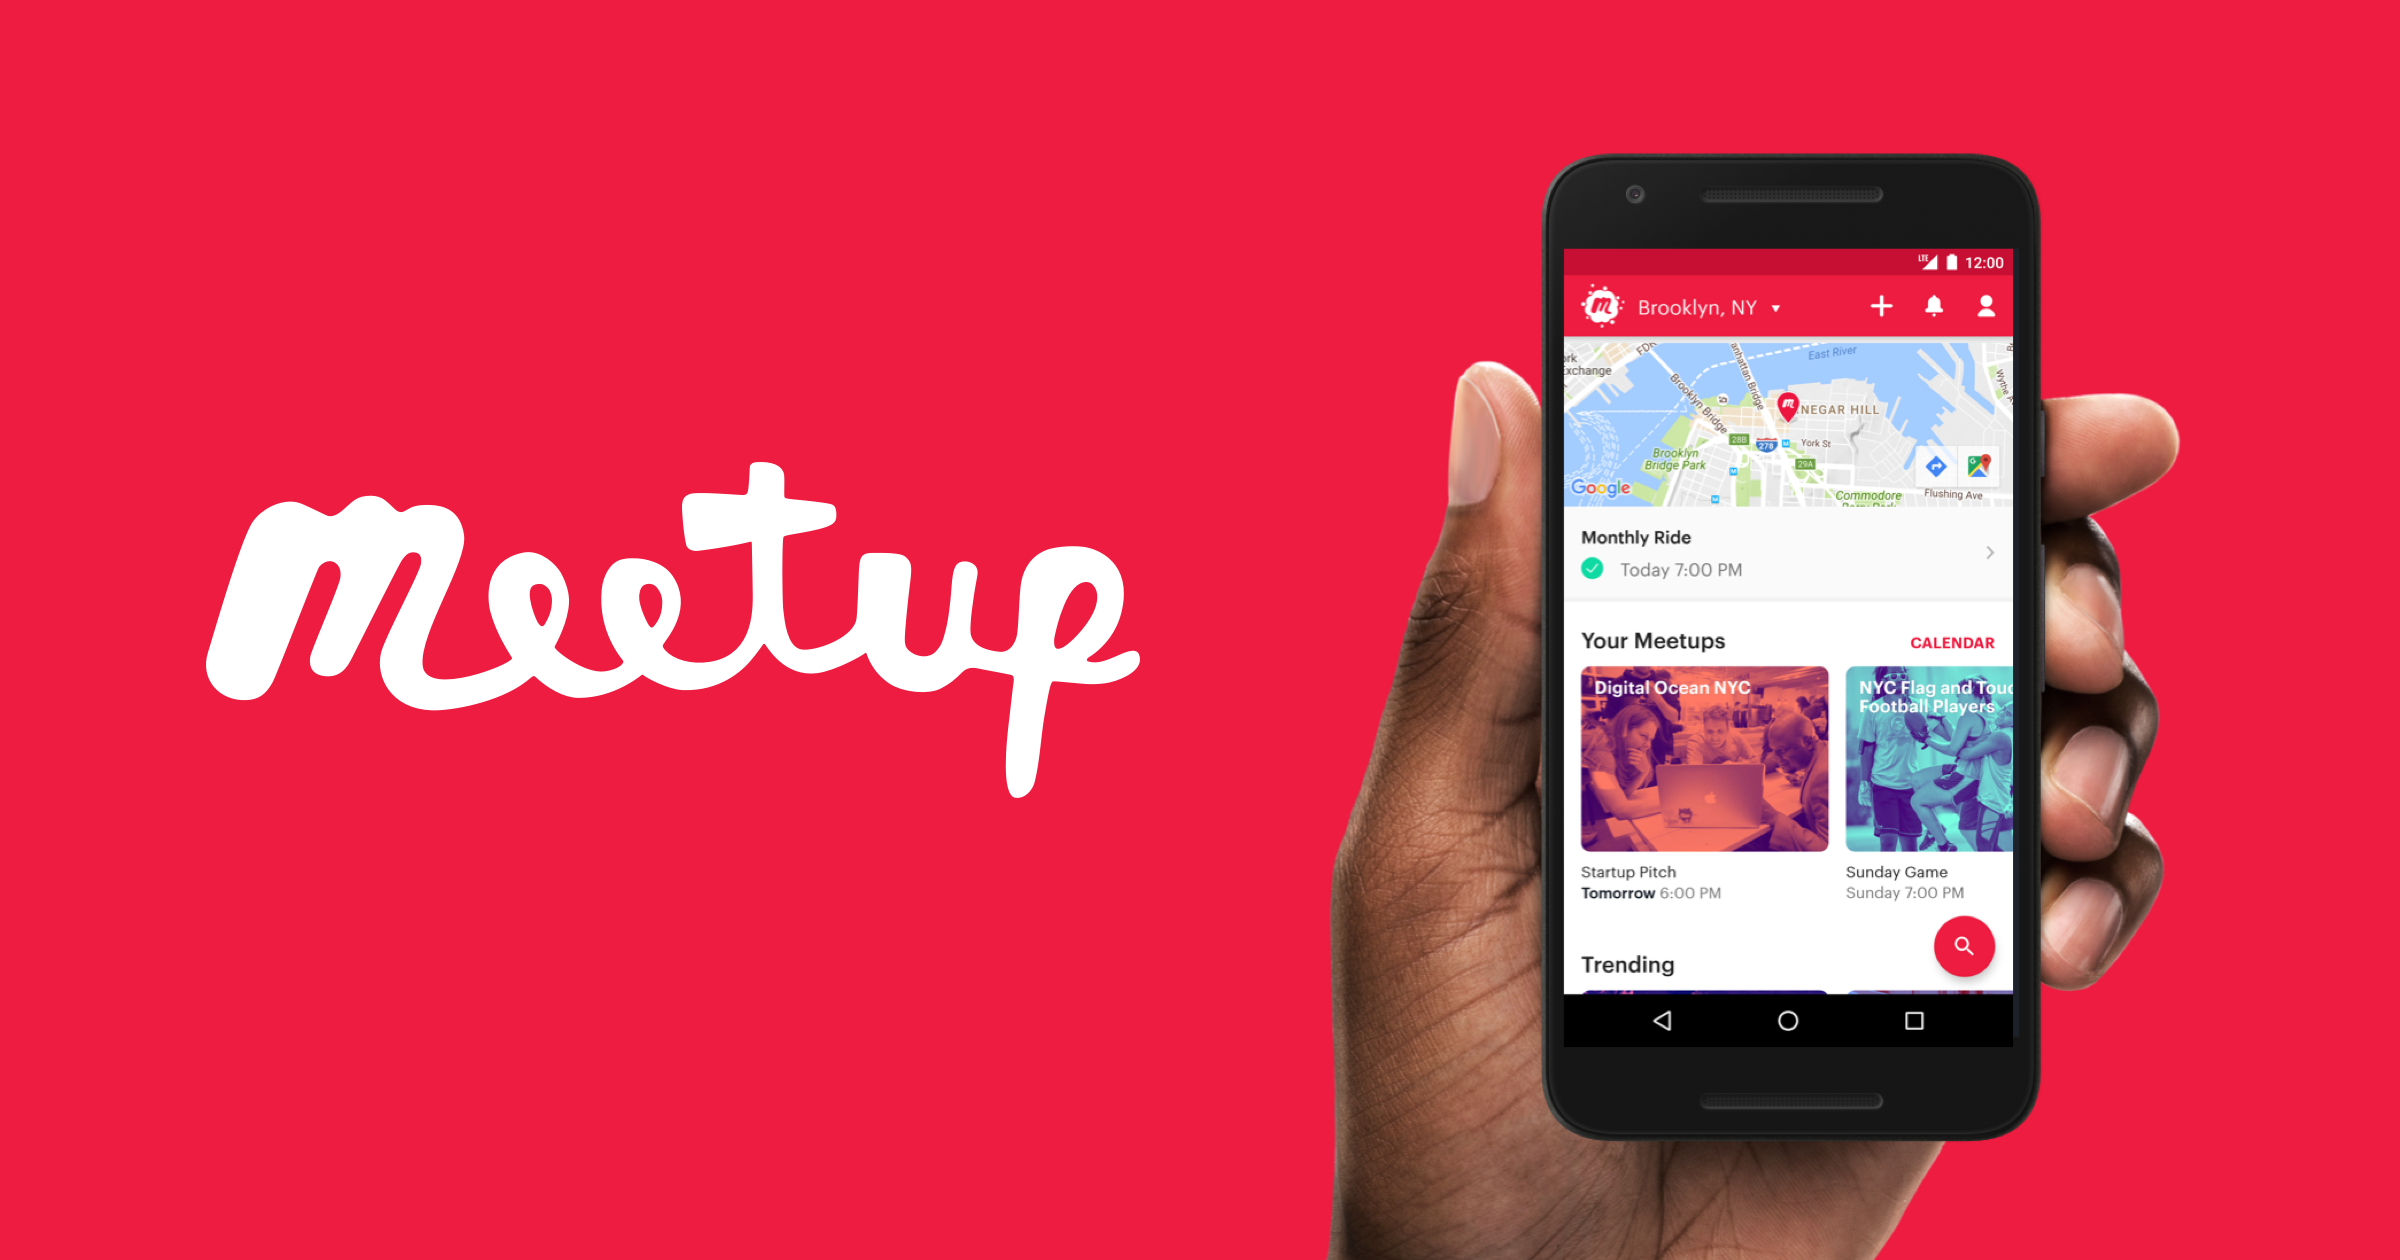 meetup - event discovery apps